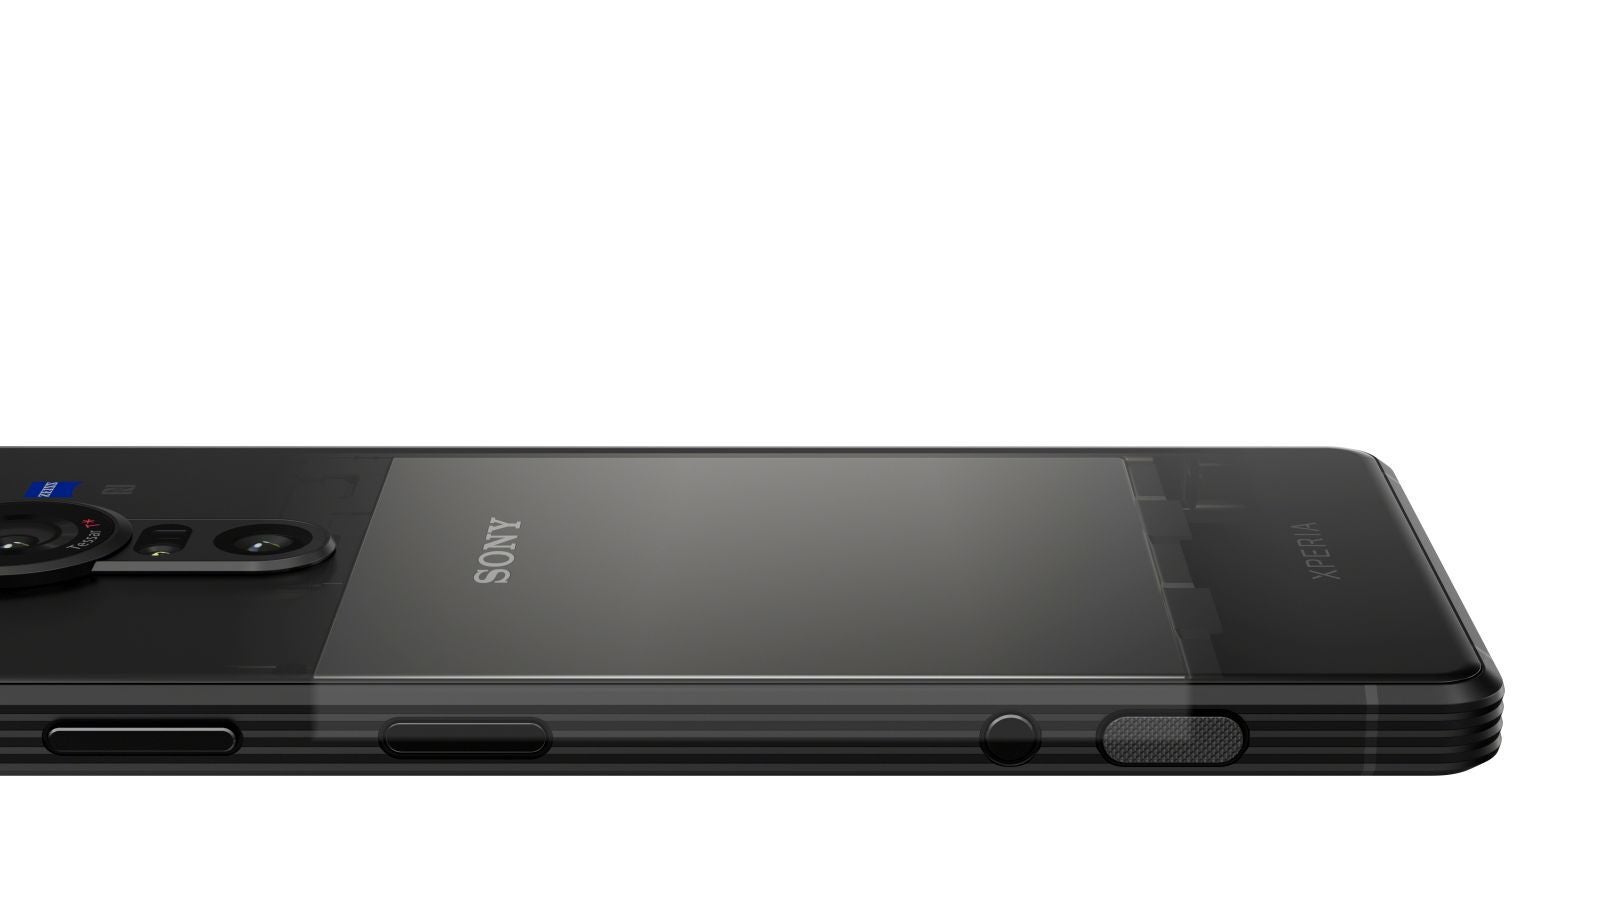 Meet the Xperia PRO-I, a phone that Sony calls “The Camera”